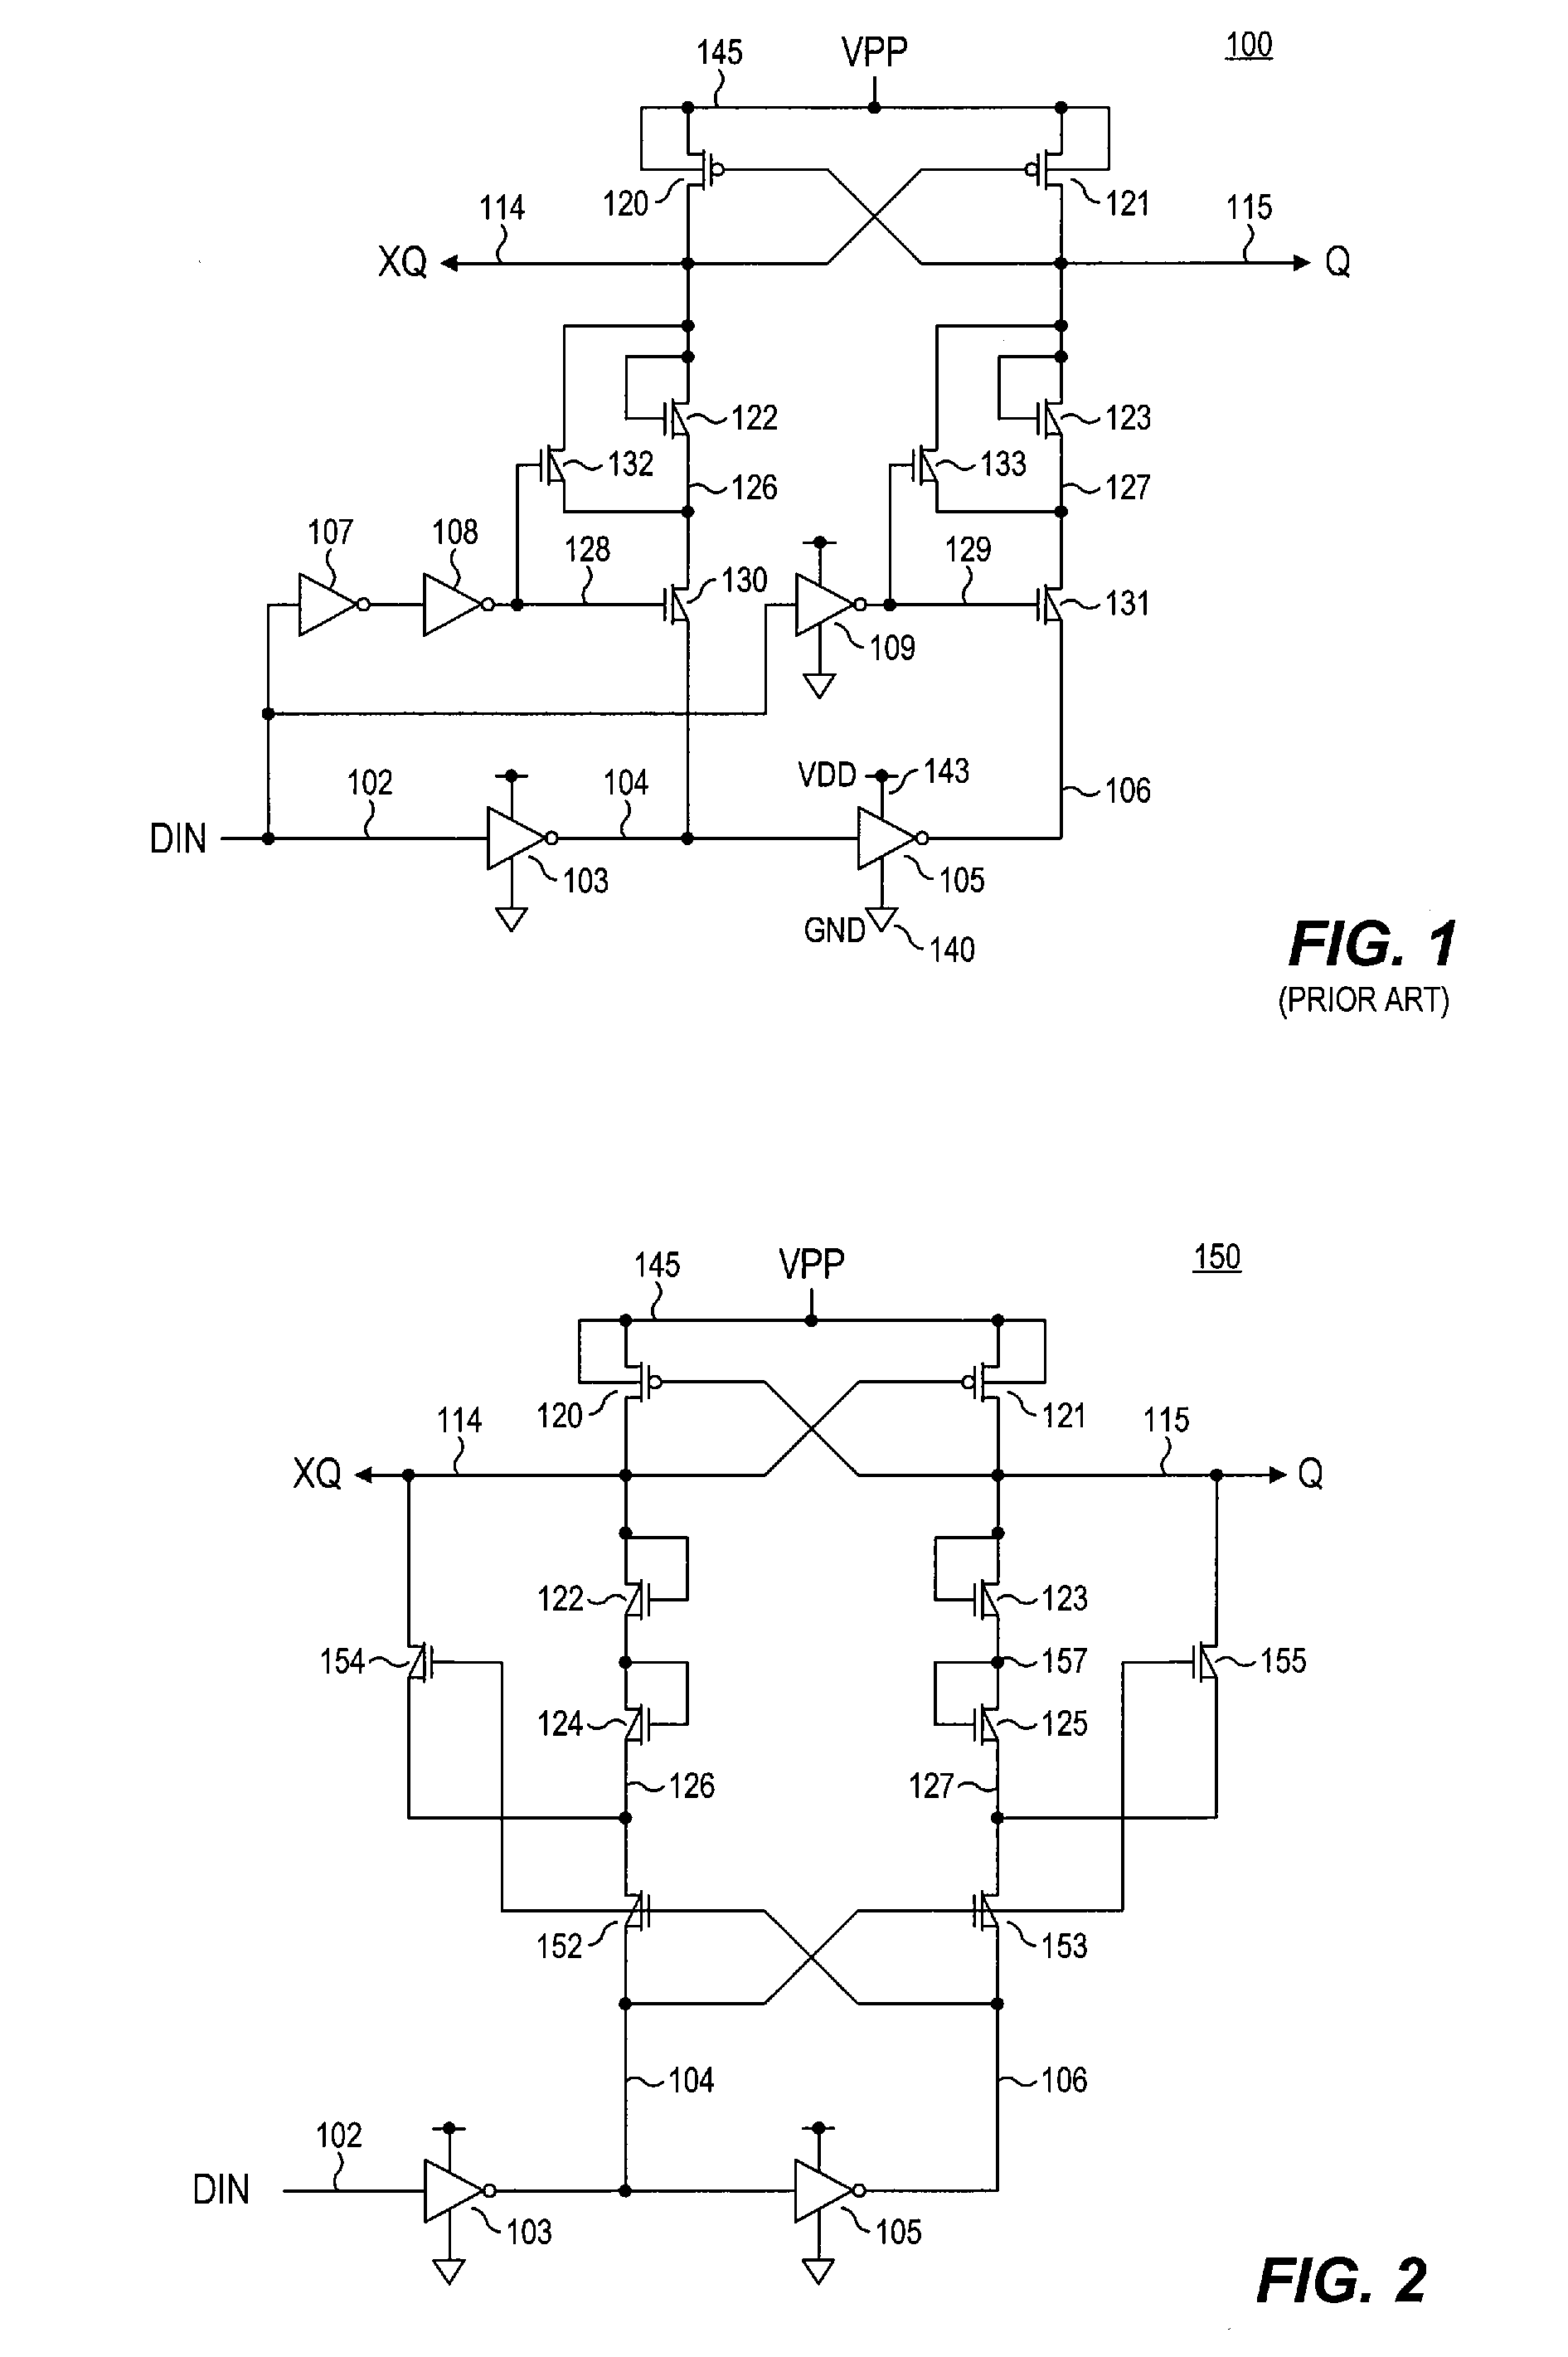 Method for incorporating transistor snap-back protection in a level shifter circuit